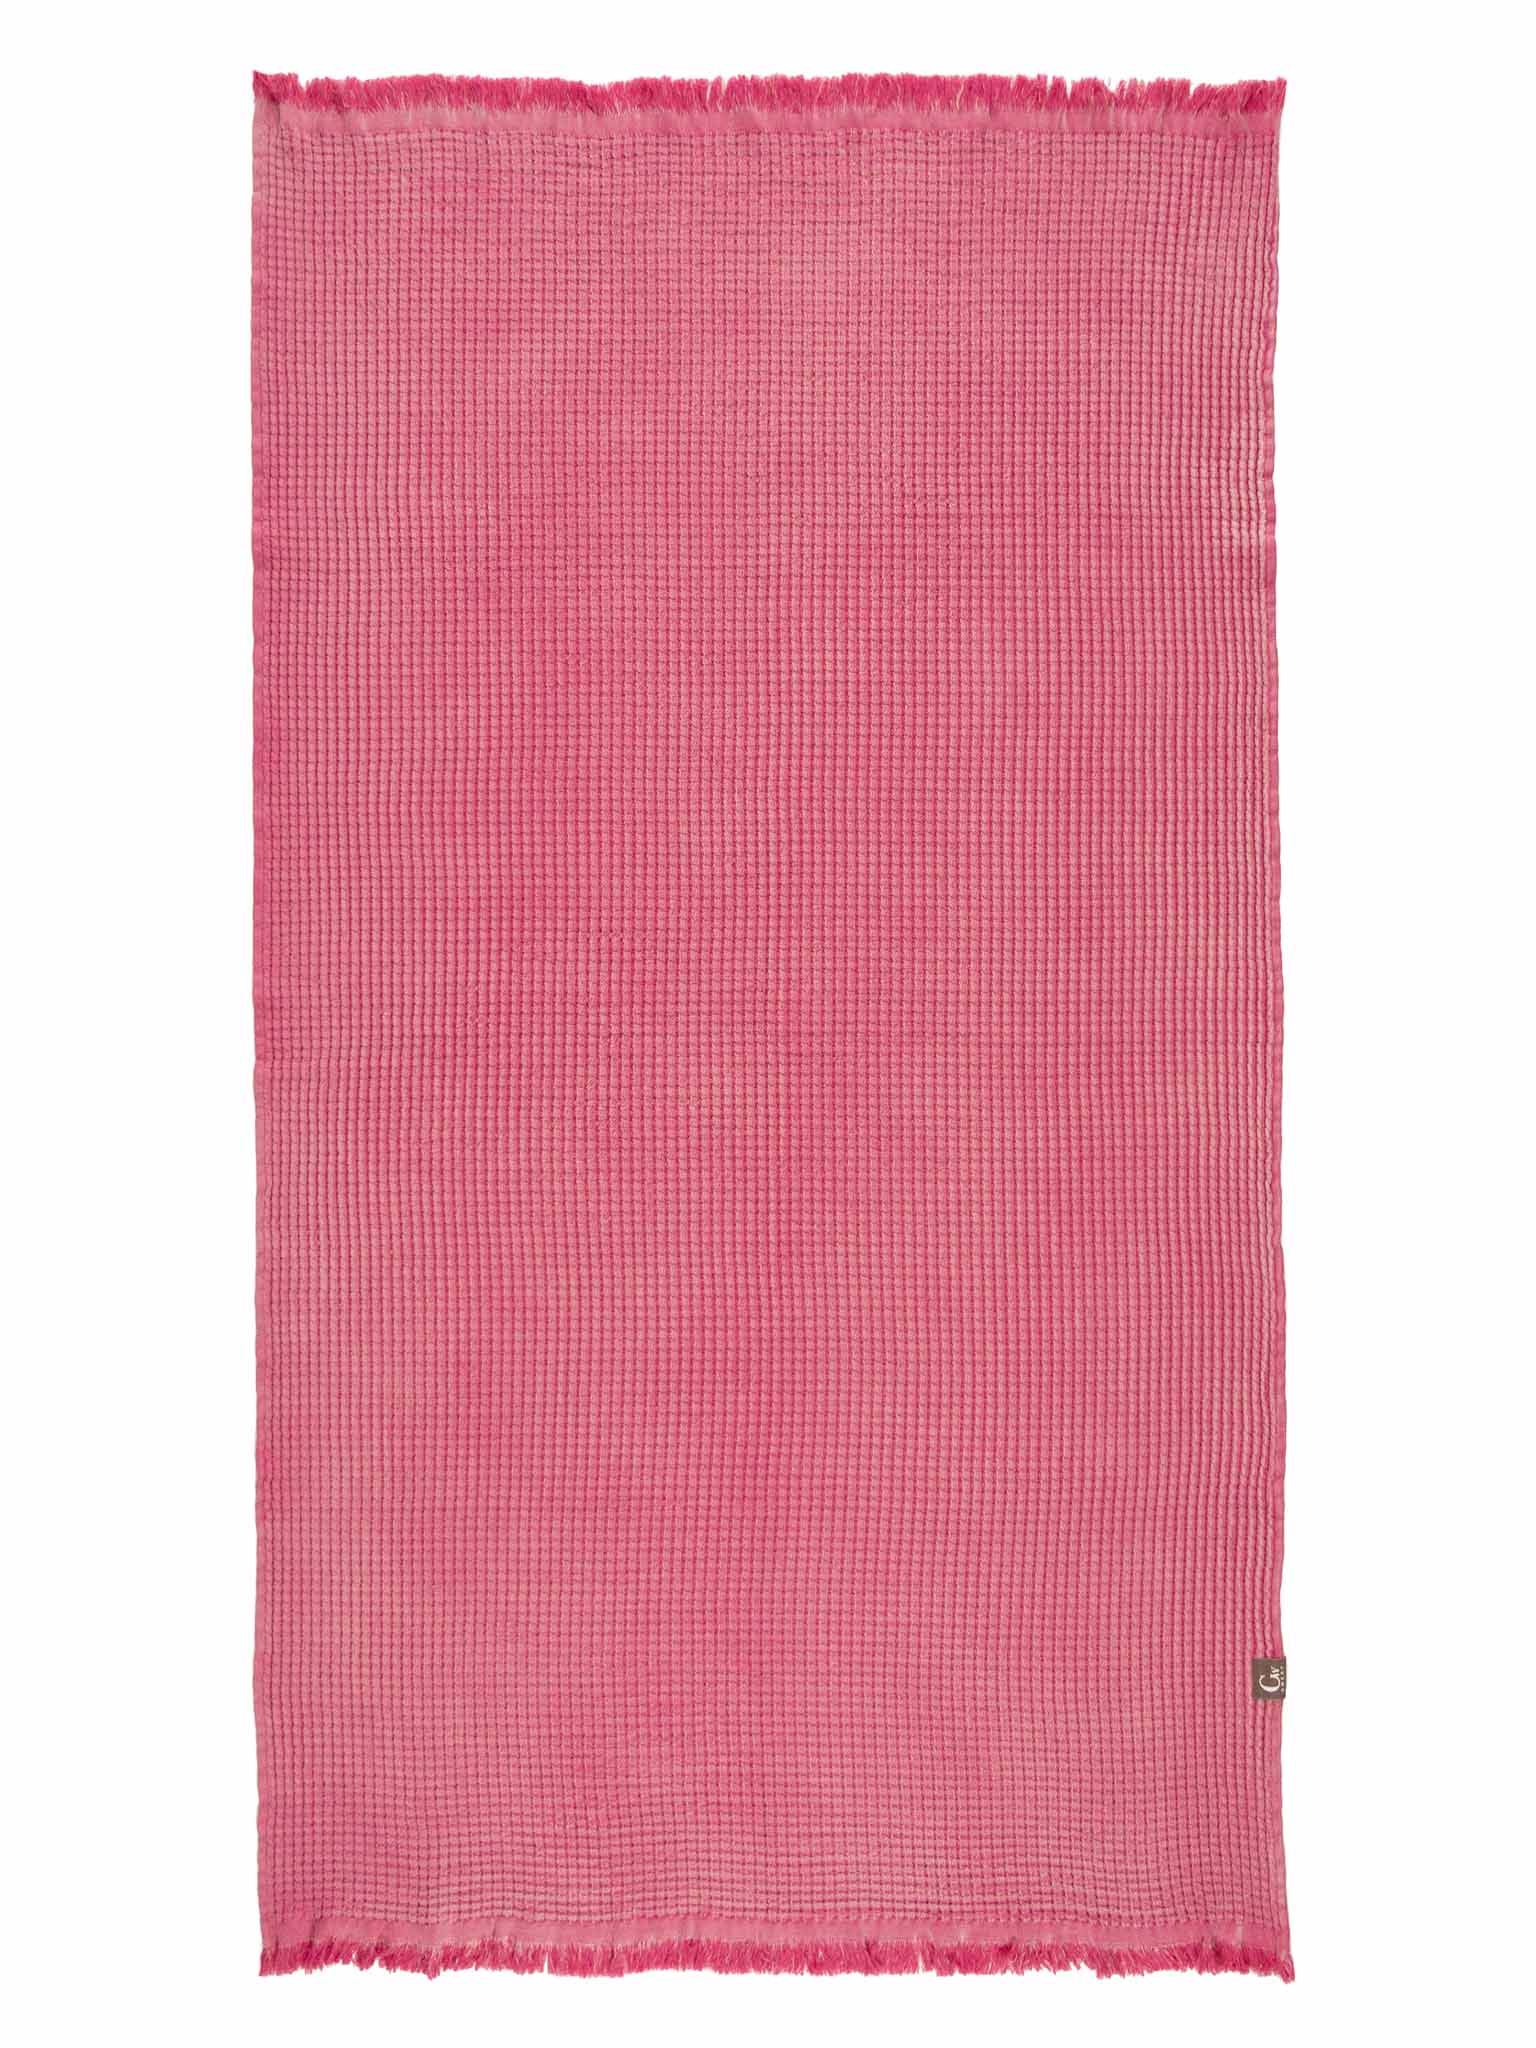 Pink double sided, honeycomb beach towel open up